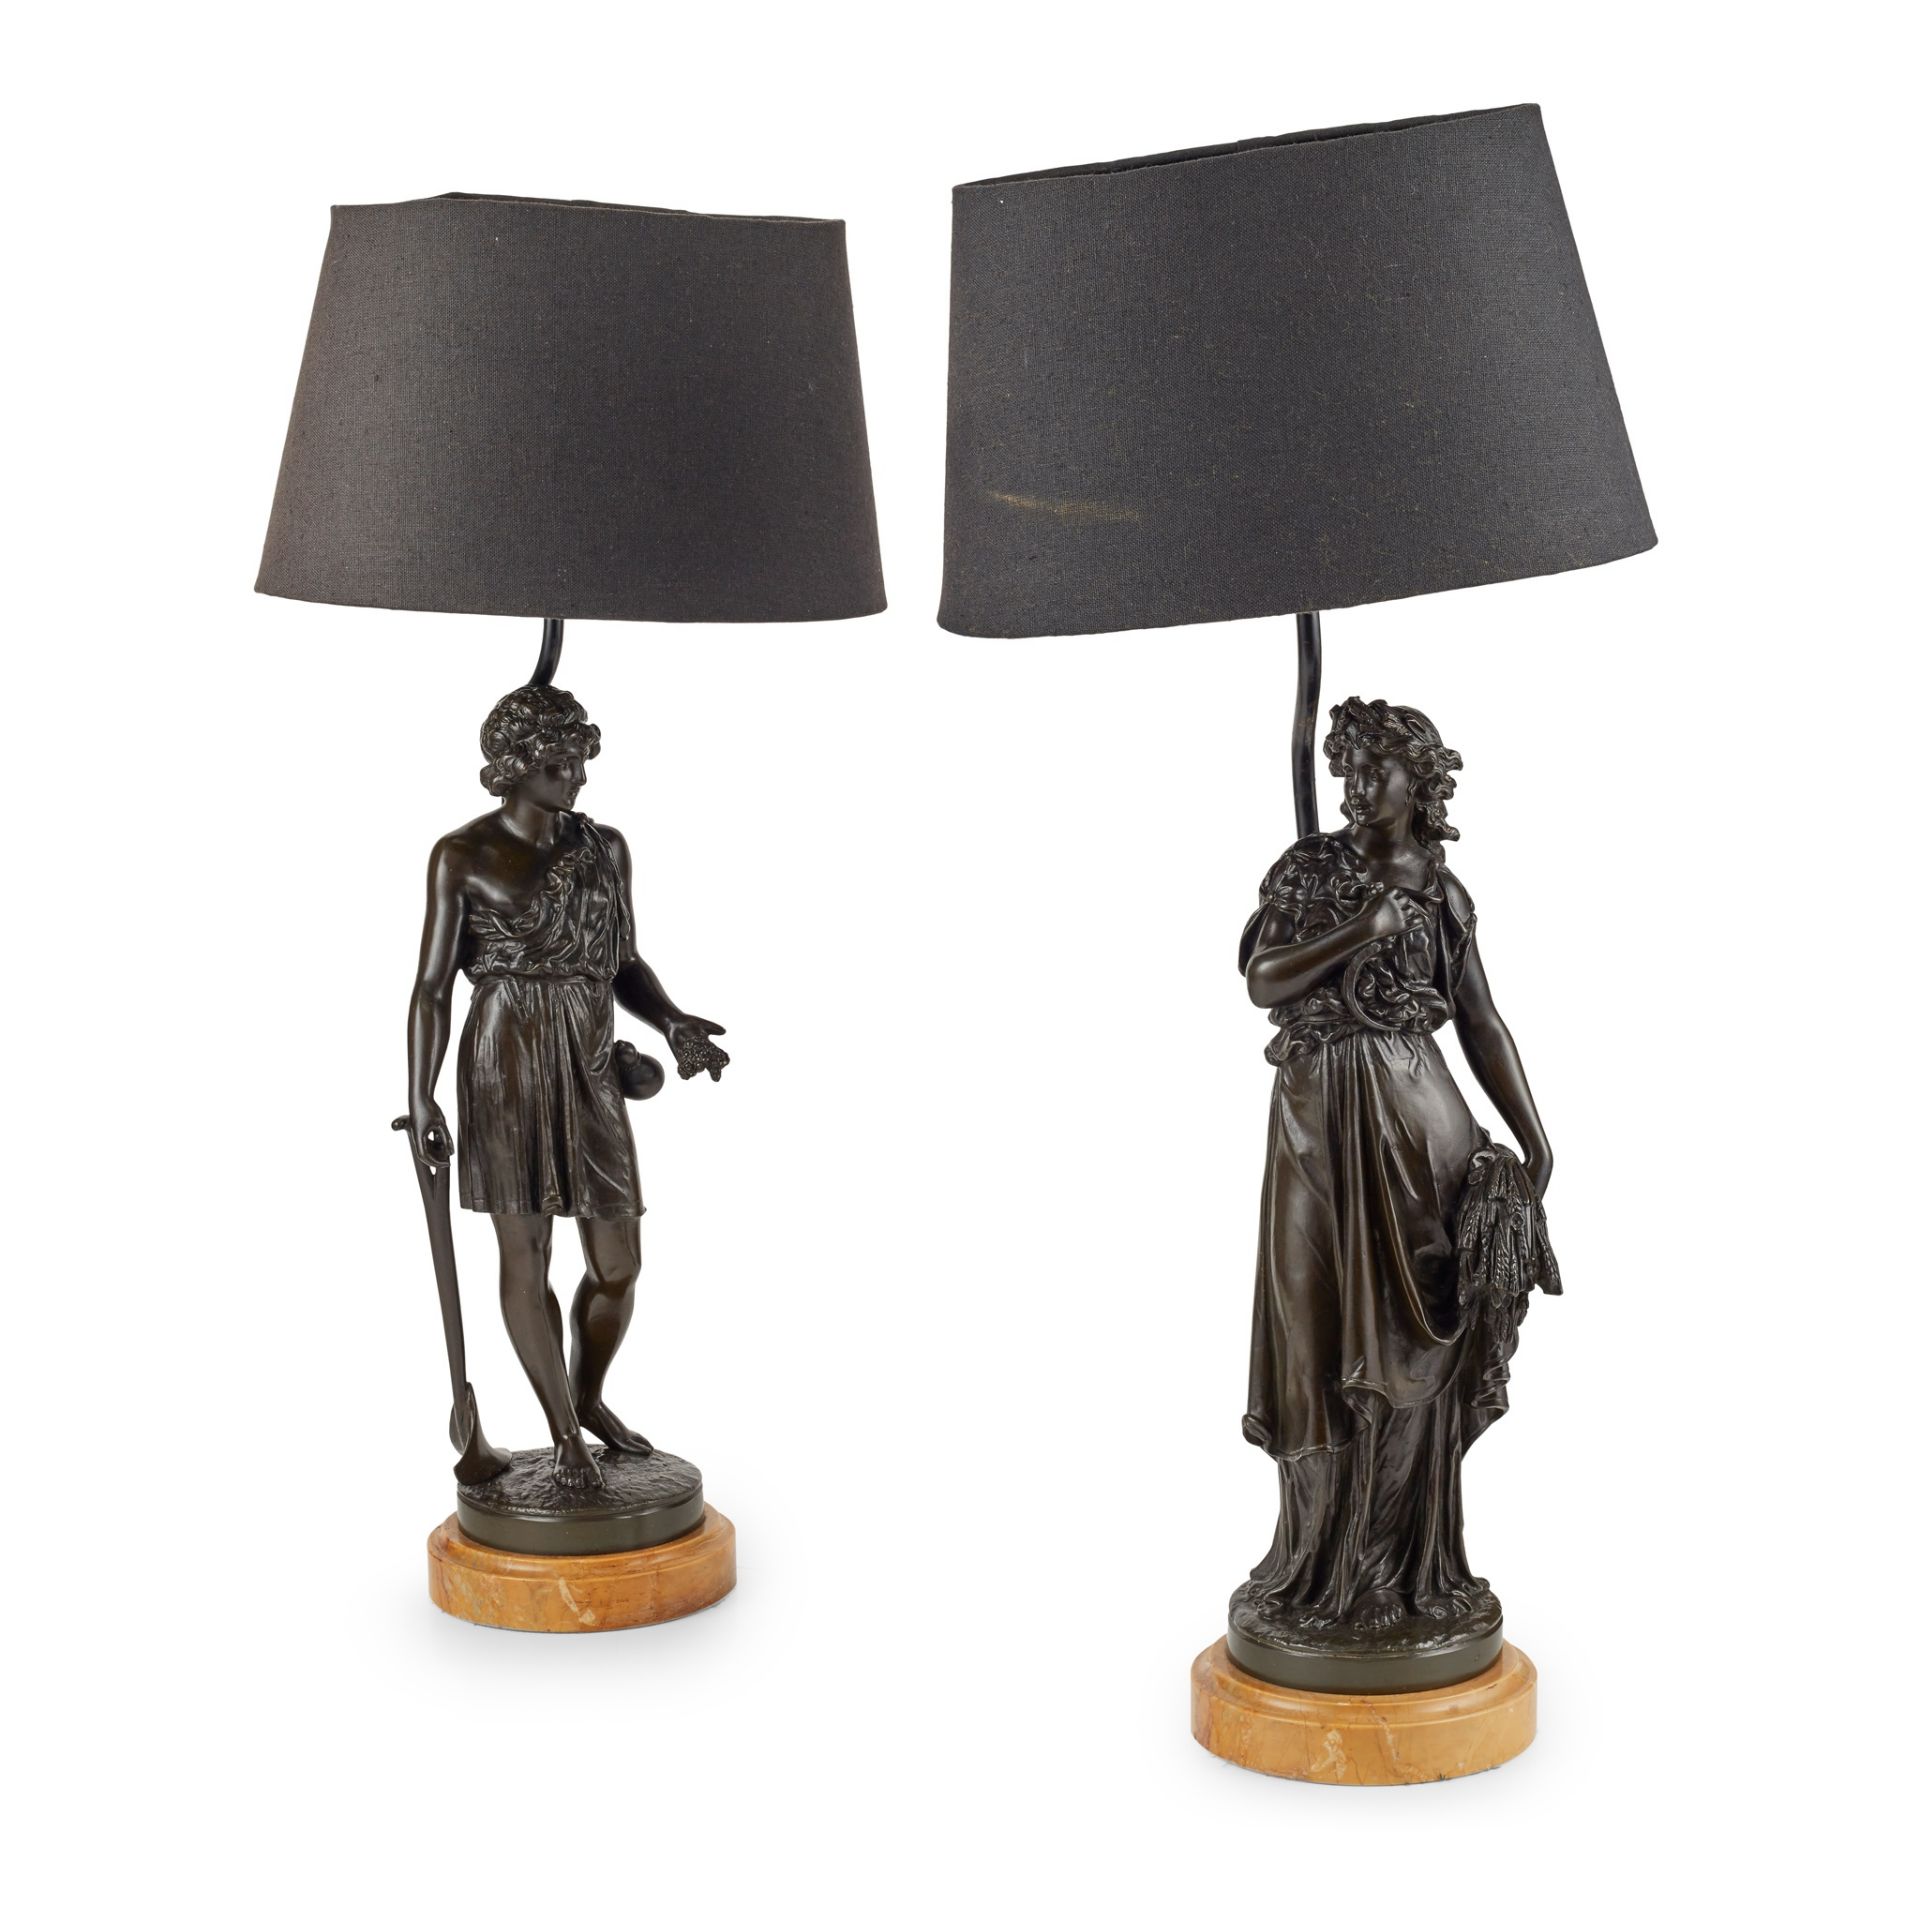 PAIR OF FRENCH BRONZE FIGURES, AFTER DENISE DELAVIGNE 19TH CENTURY